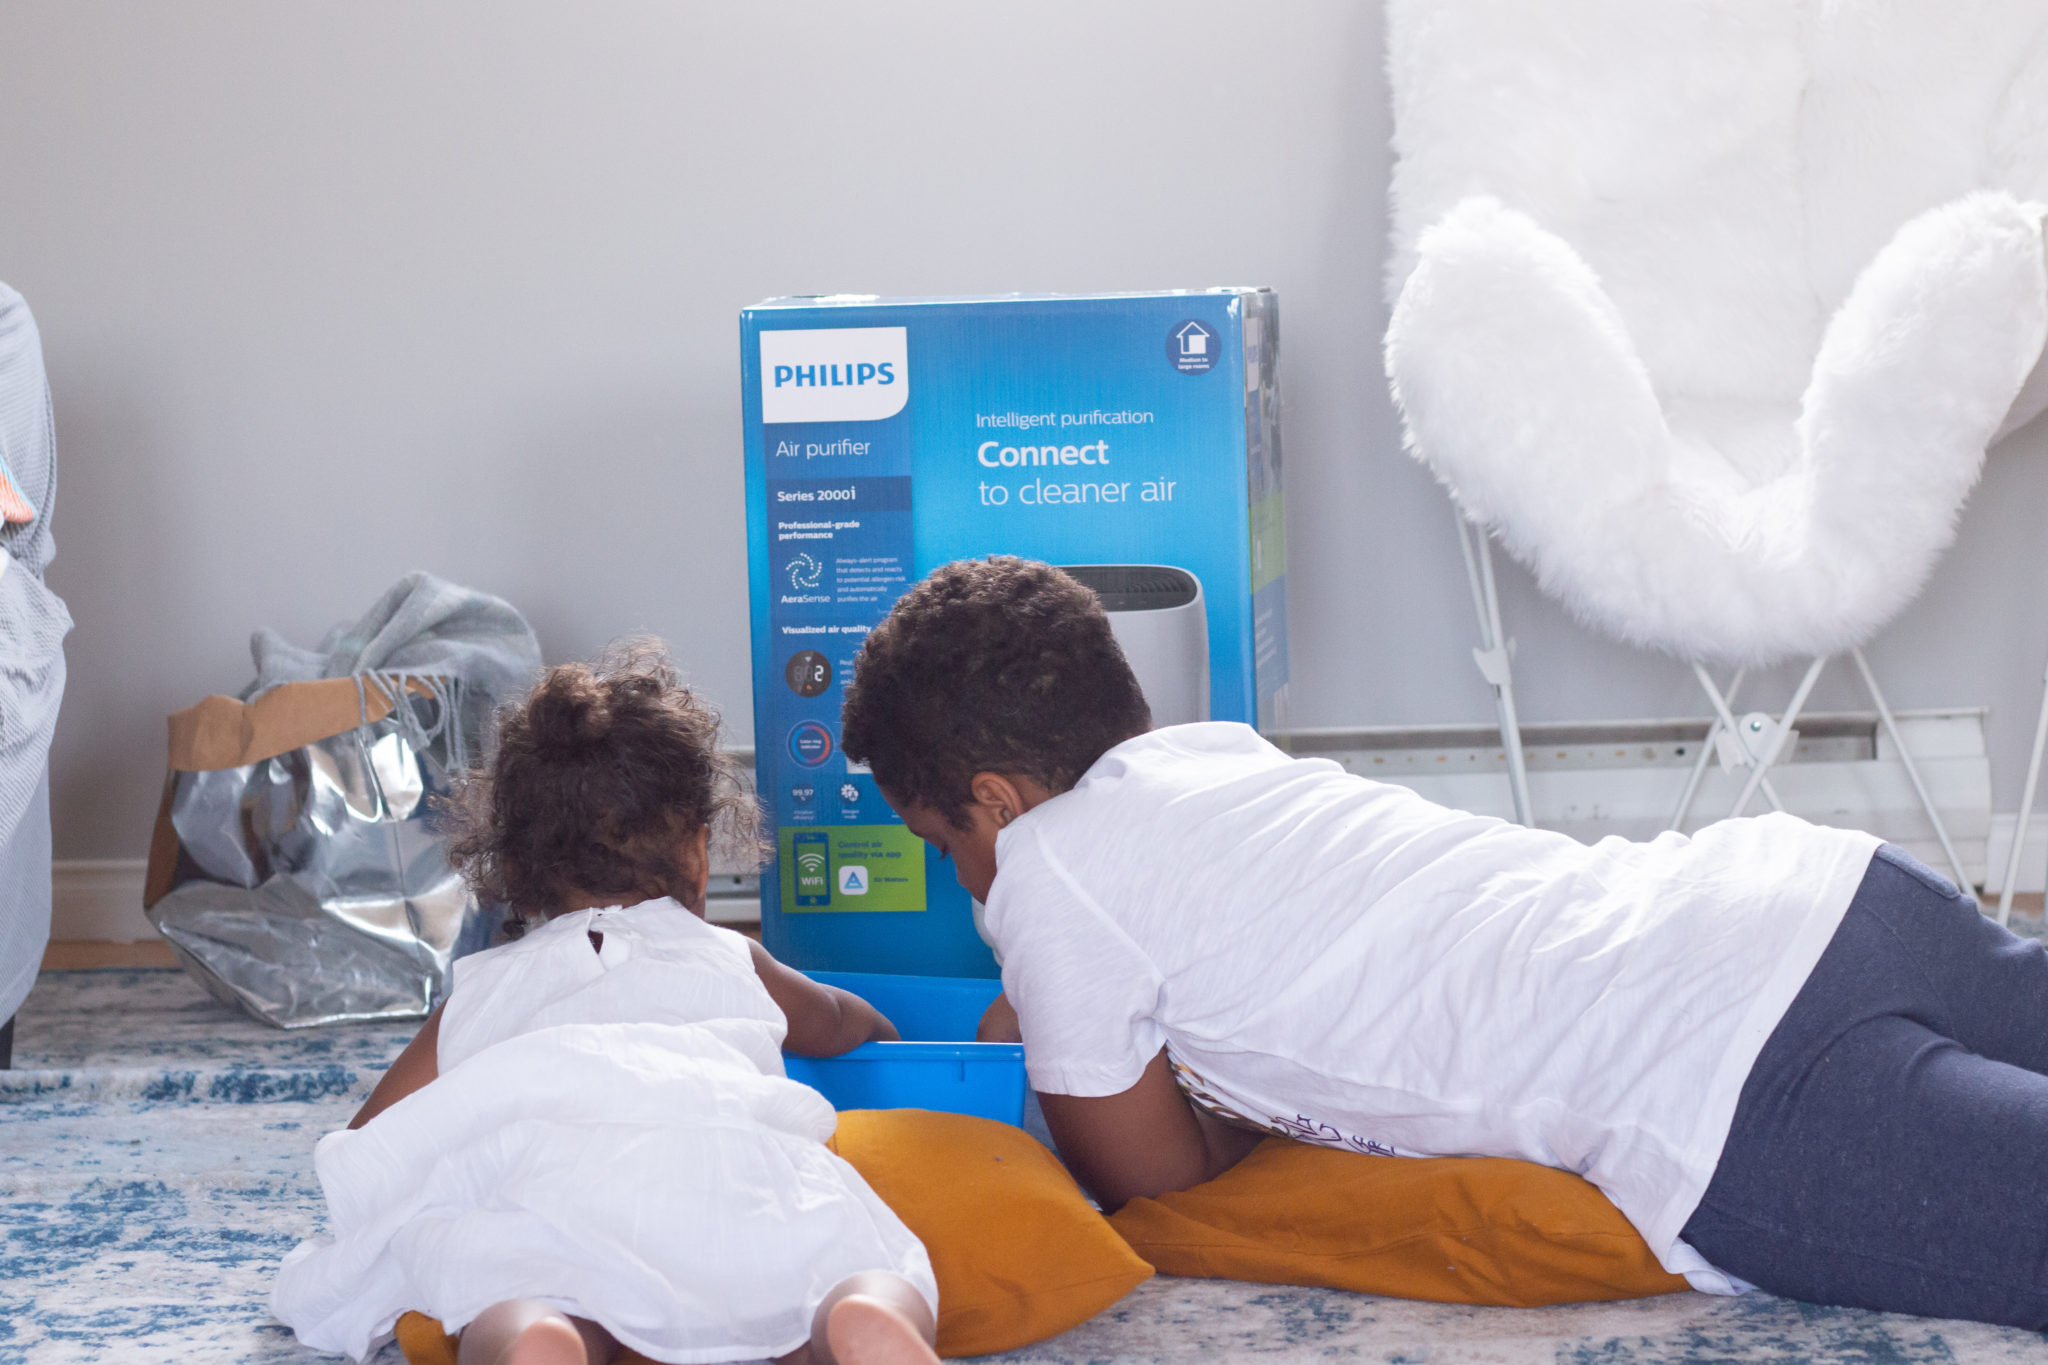 Breathe Easy: Clean Air Thanks To The NEW Philips 2000i Air Purifier